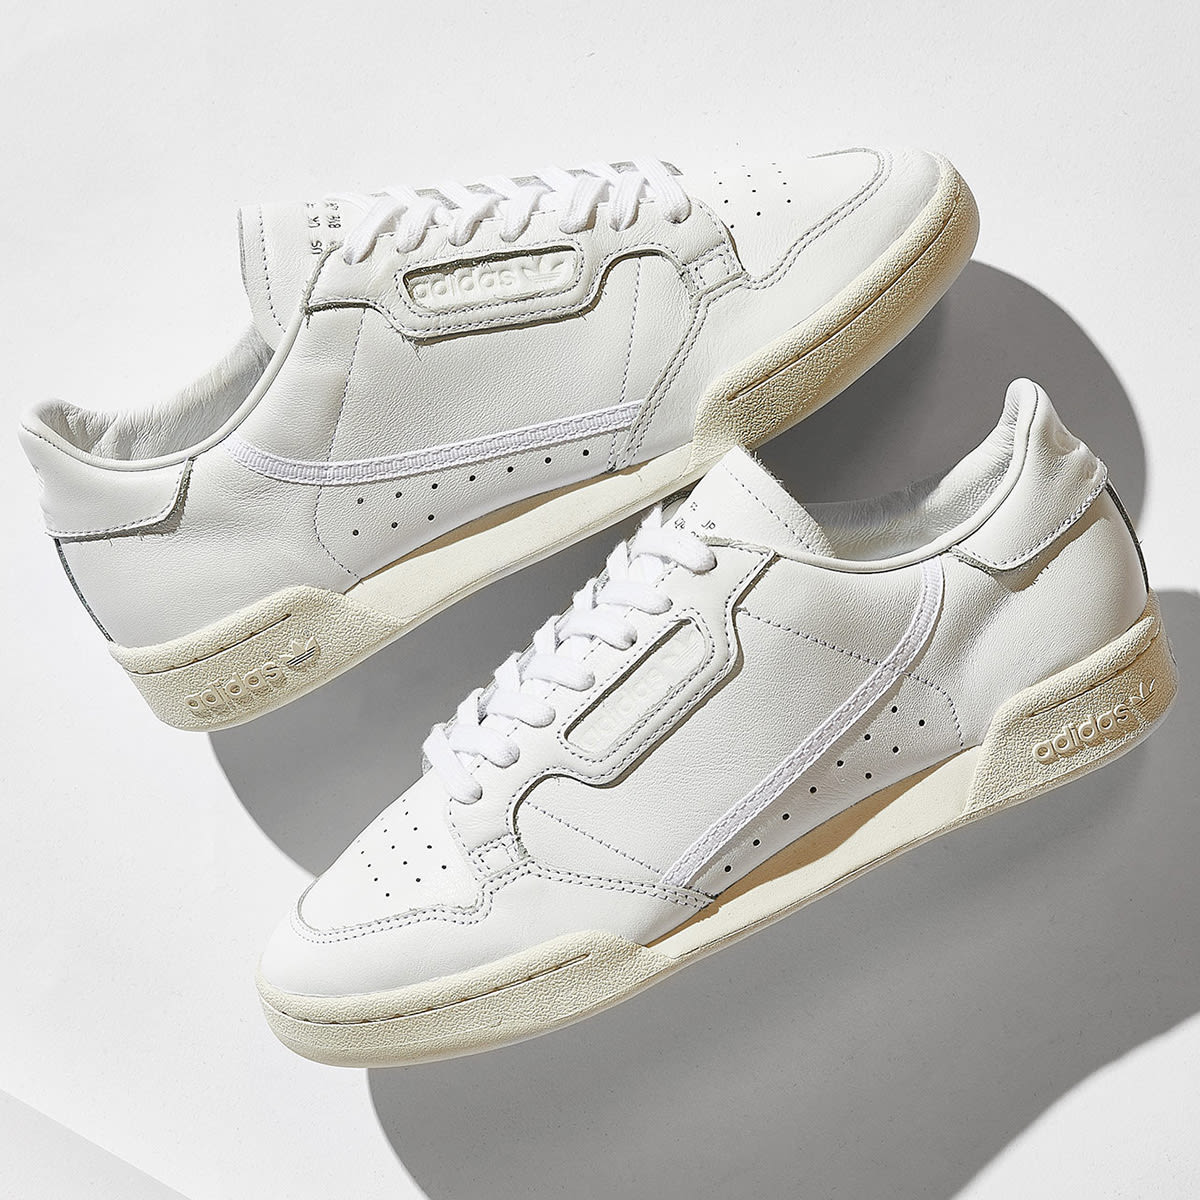 Adidas Continental 80 (White & Off White) | END. Launches